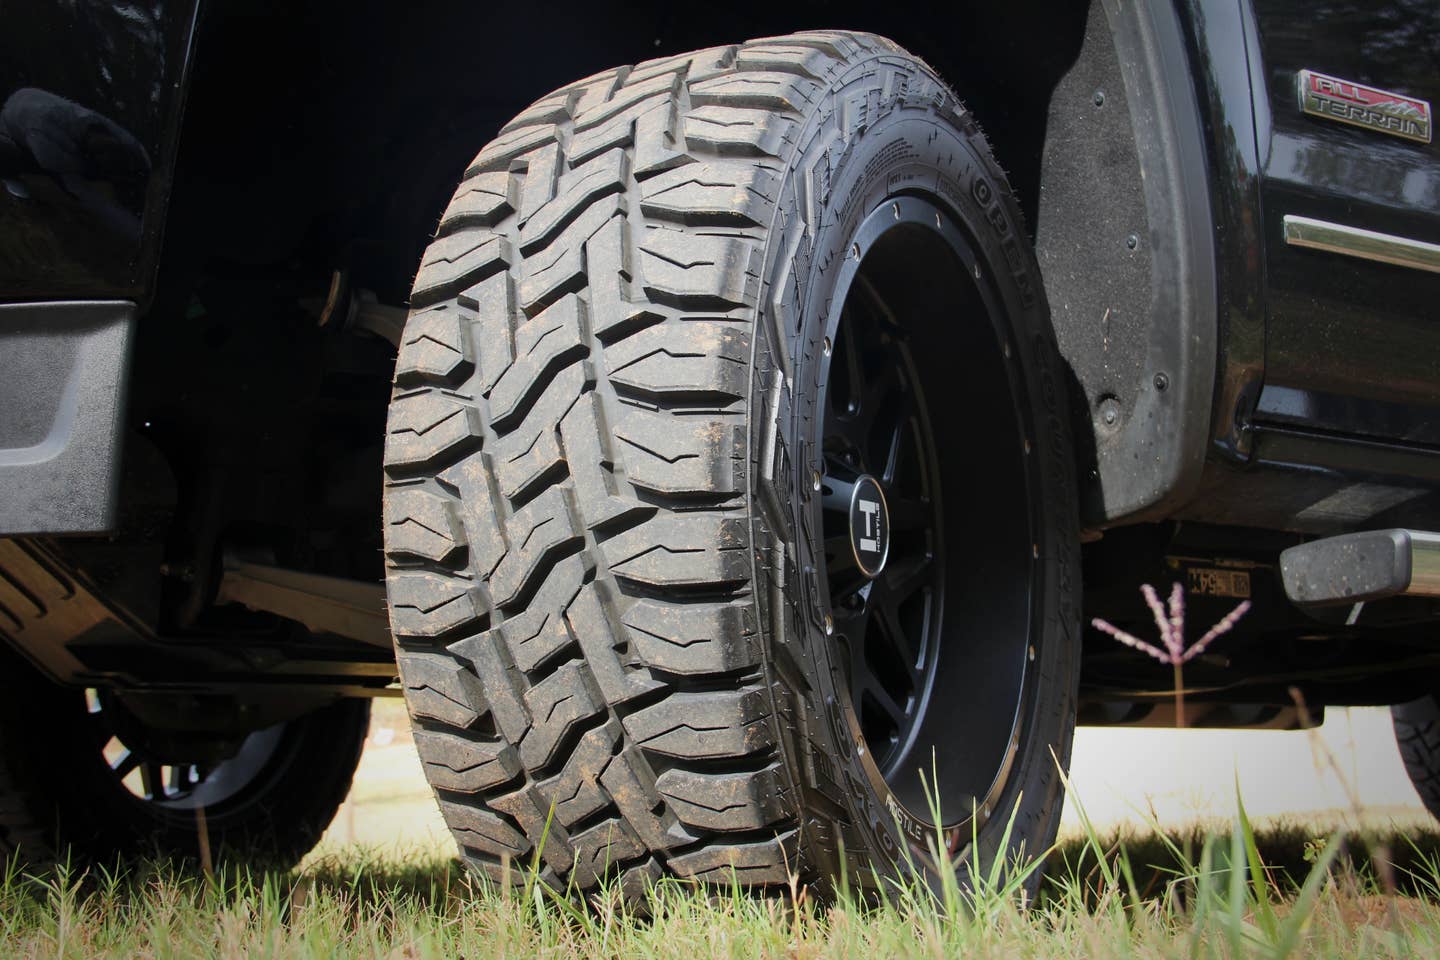 Toyo Open Country R/T 5,000 Mile Tire Review